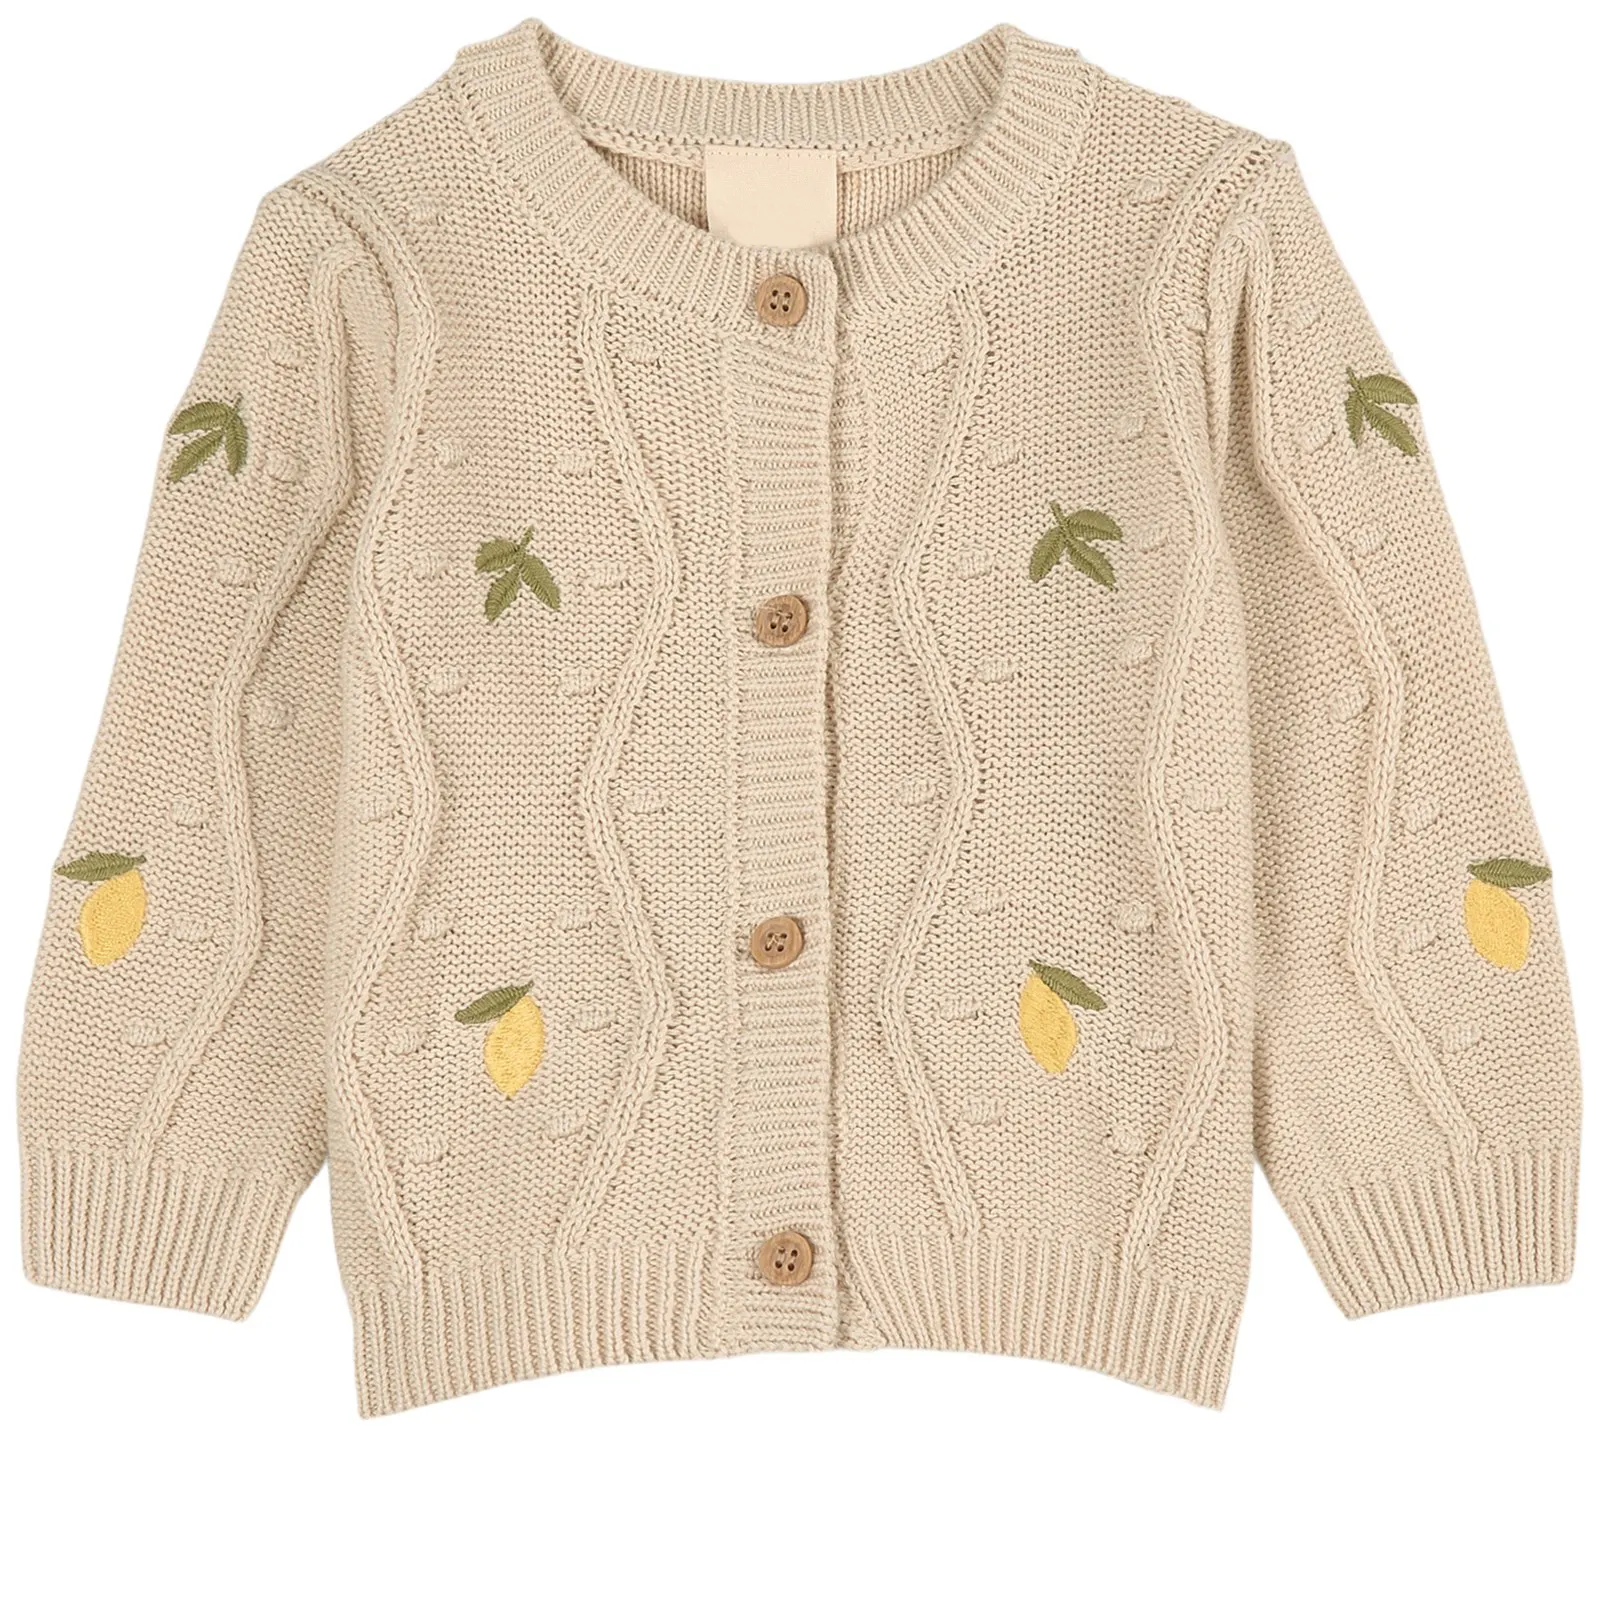 Wholesale Custom Cardigan Cashmere Knitted Sweaters Kids Boys Sweaters Children's Baby Girls' Sweaters